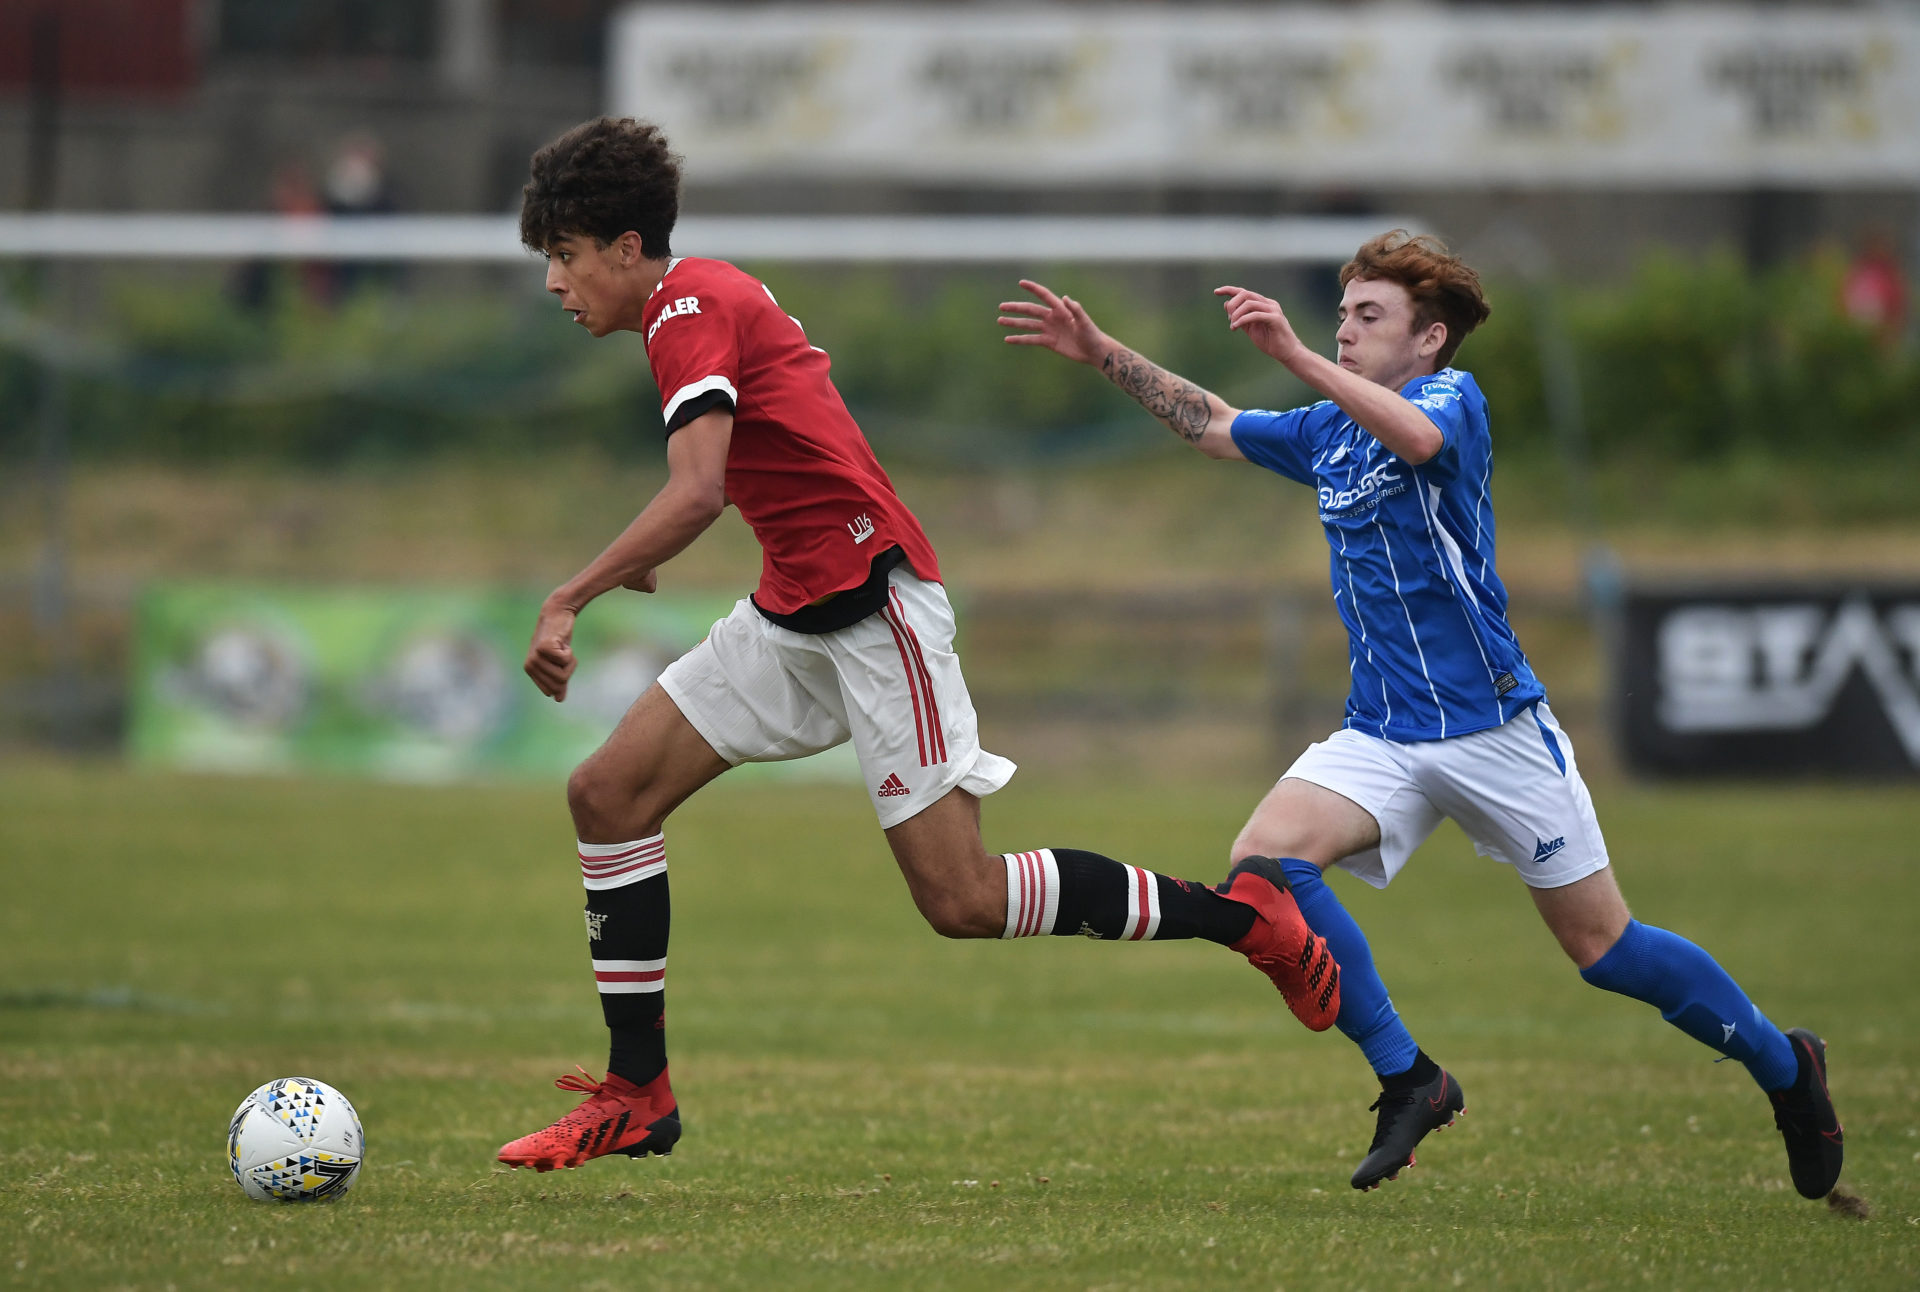 Manchester United u17s win to reach Adidas Generation Cup quarterfinals